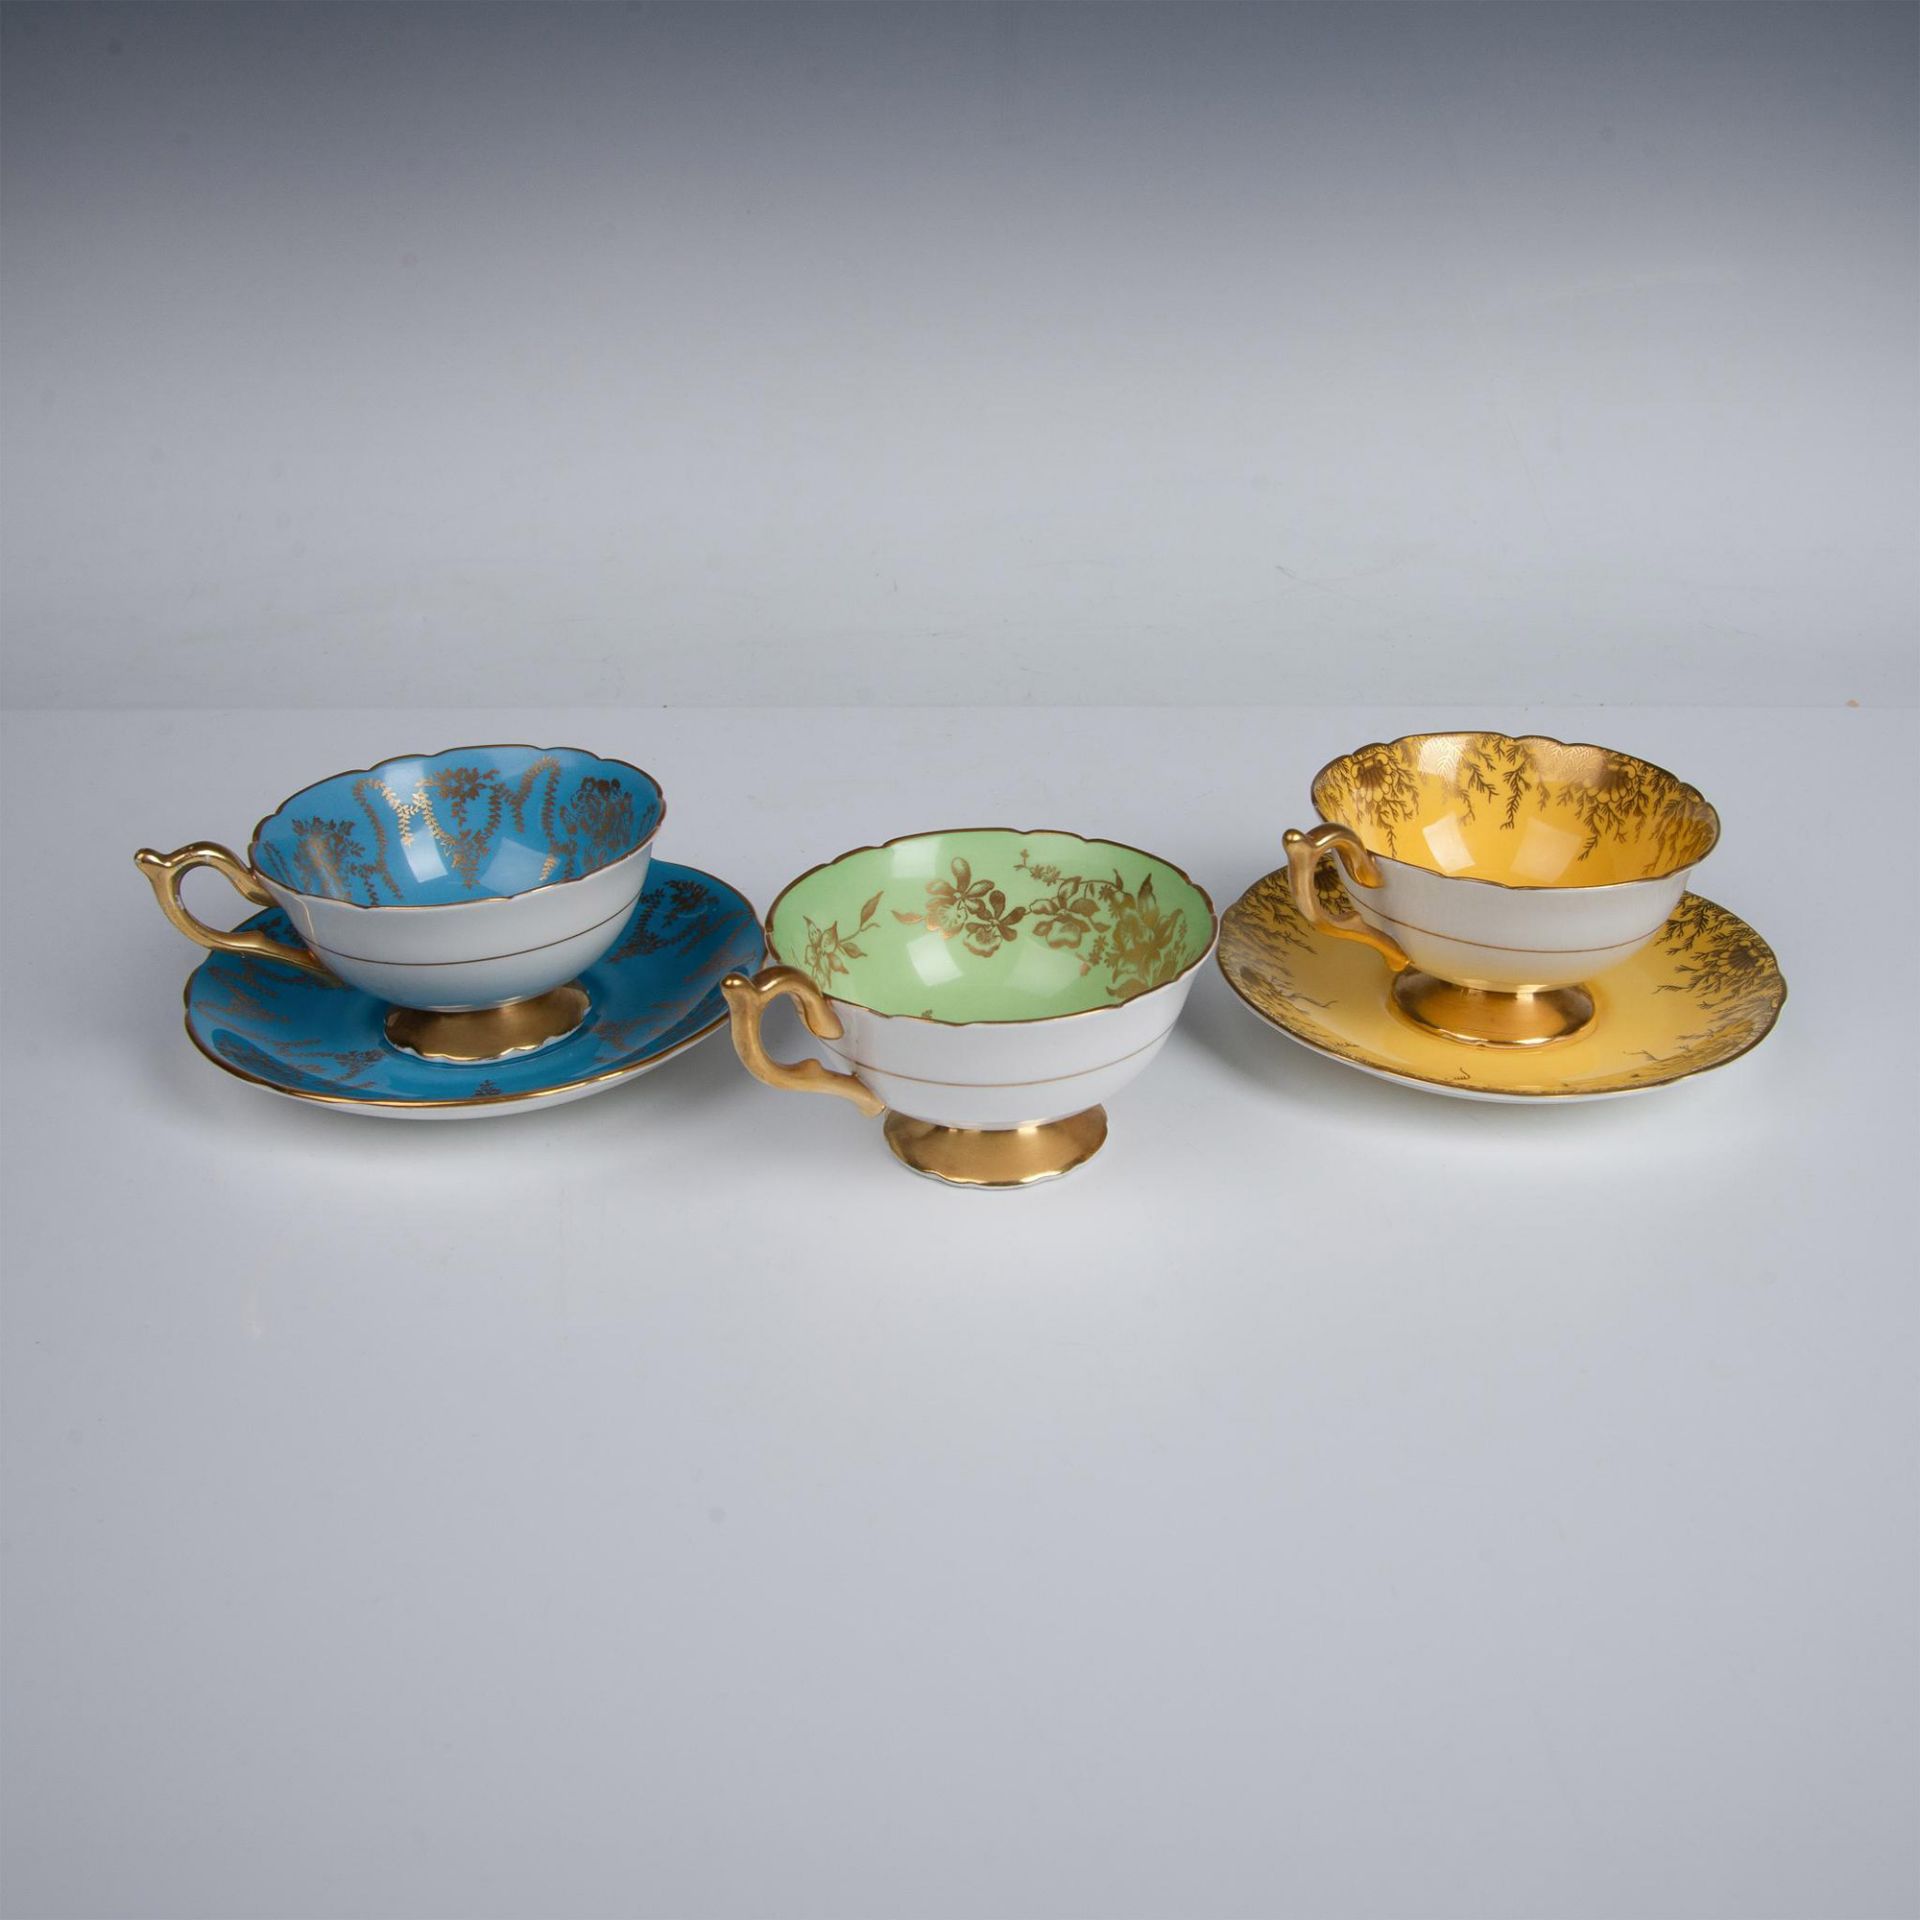 5pc Coalport Teacups and Saucers Gilded Over Color - Image 6 of 6